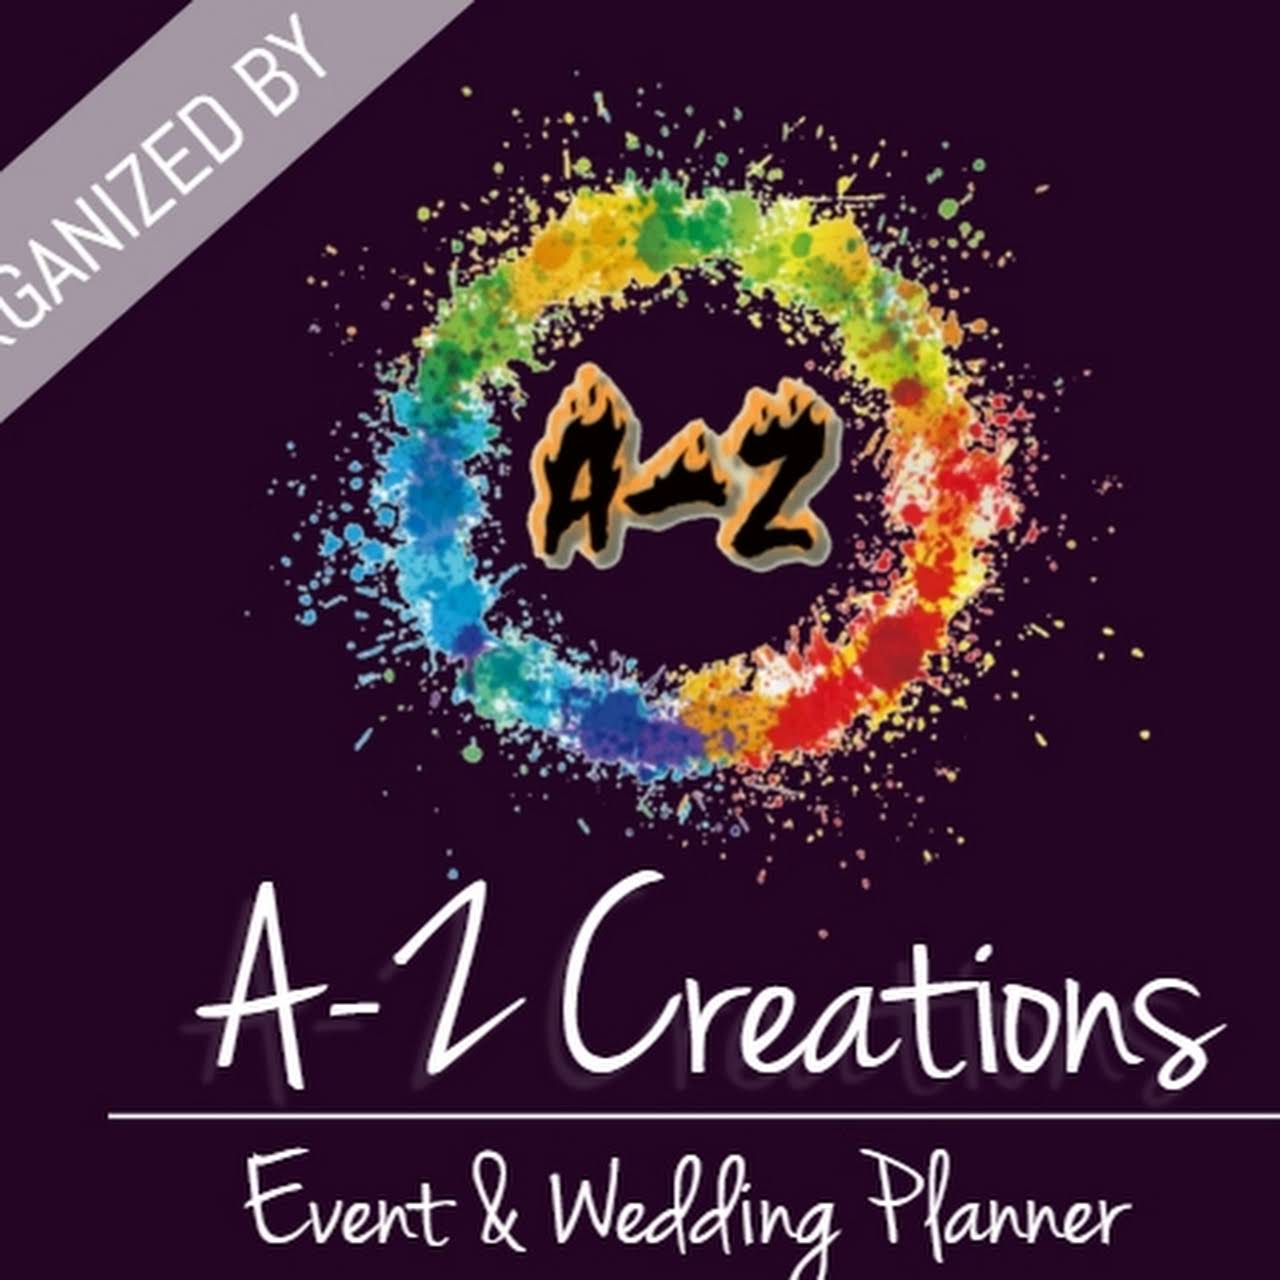 A-Z Creations Wedding Planner & Events